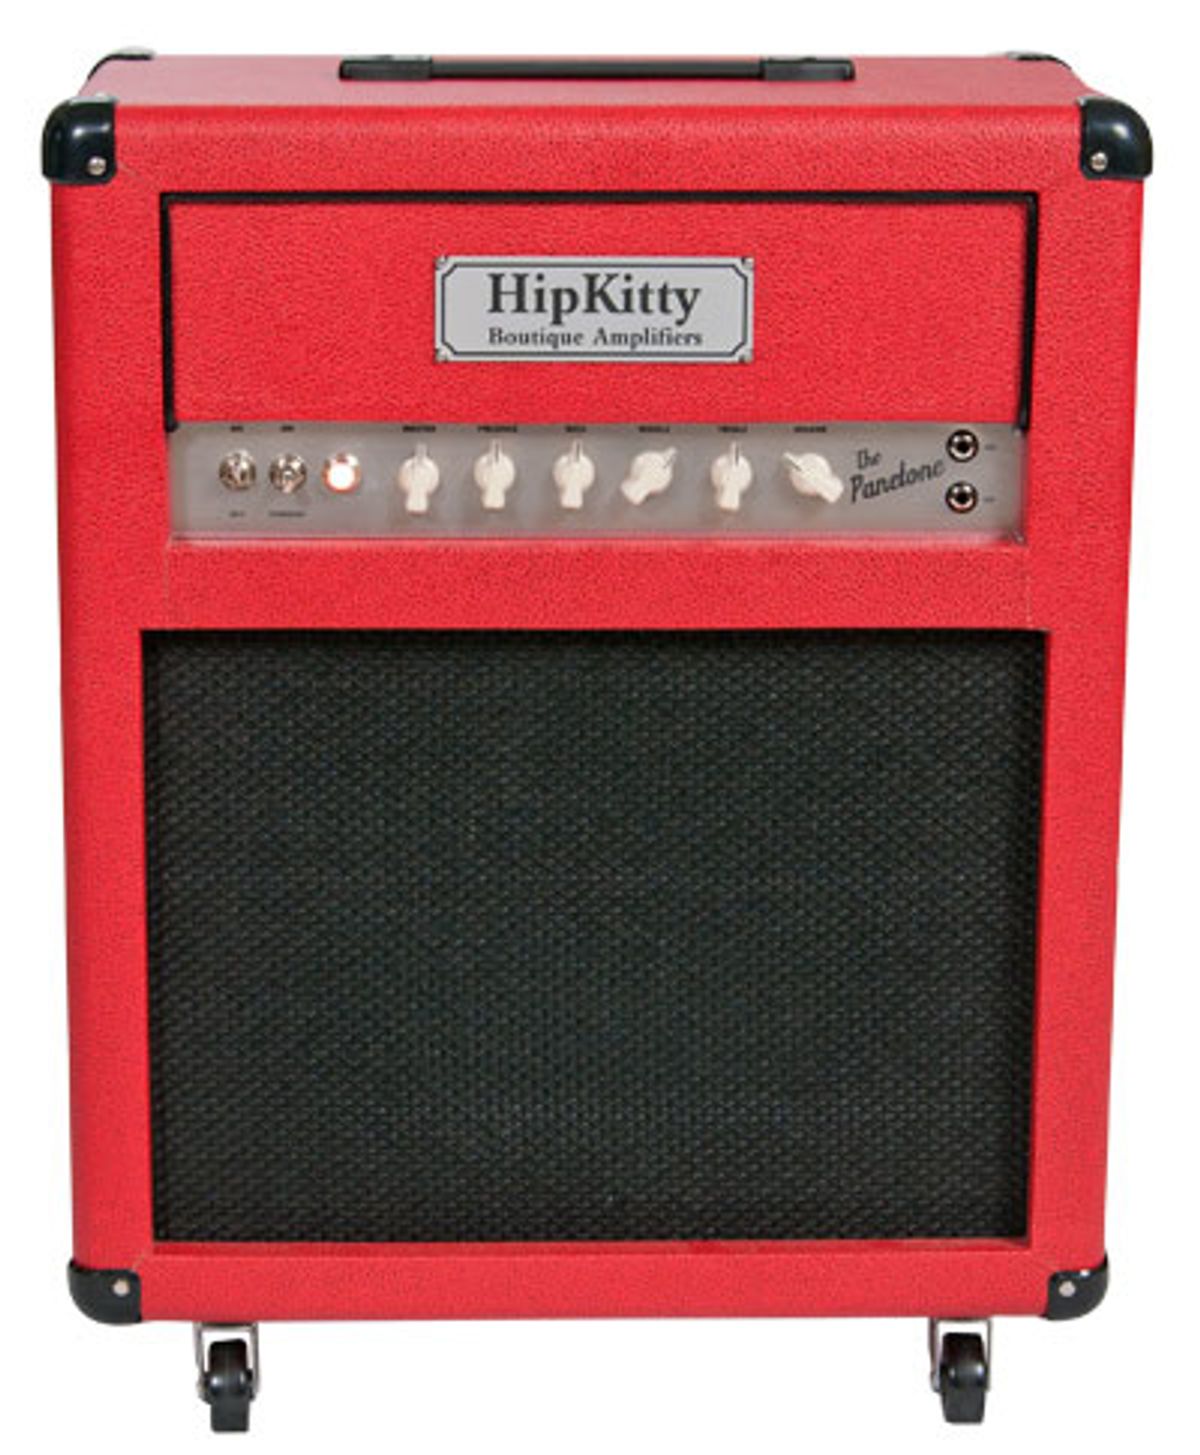 Hip Kitty Panetone Combo Amp Review